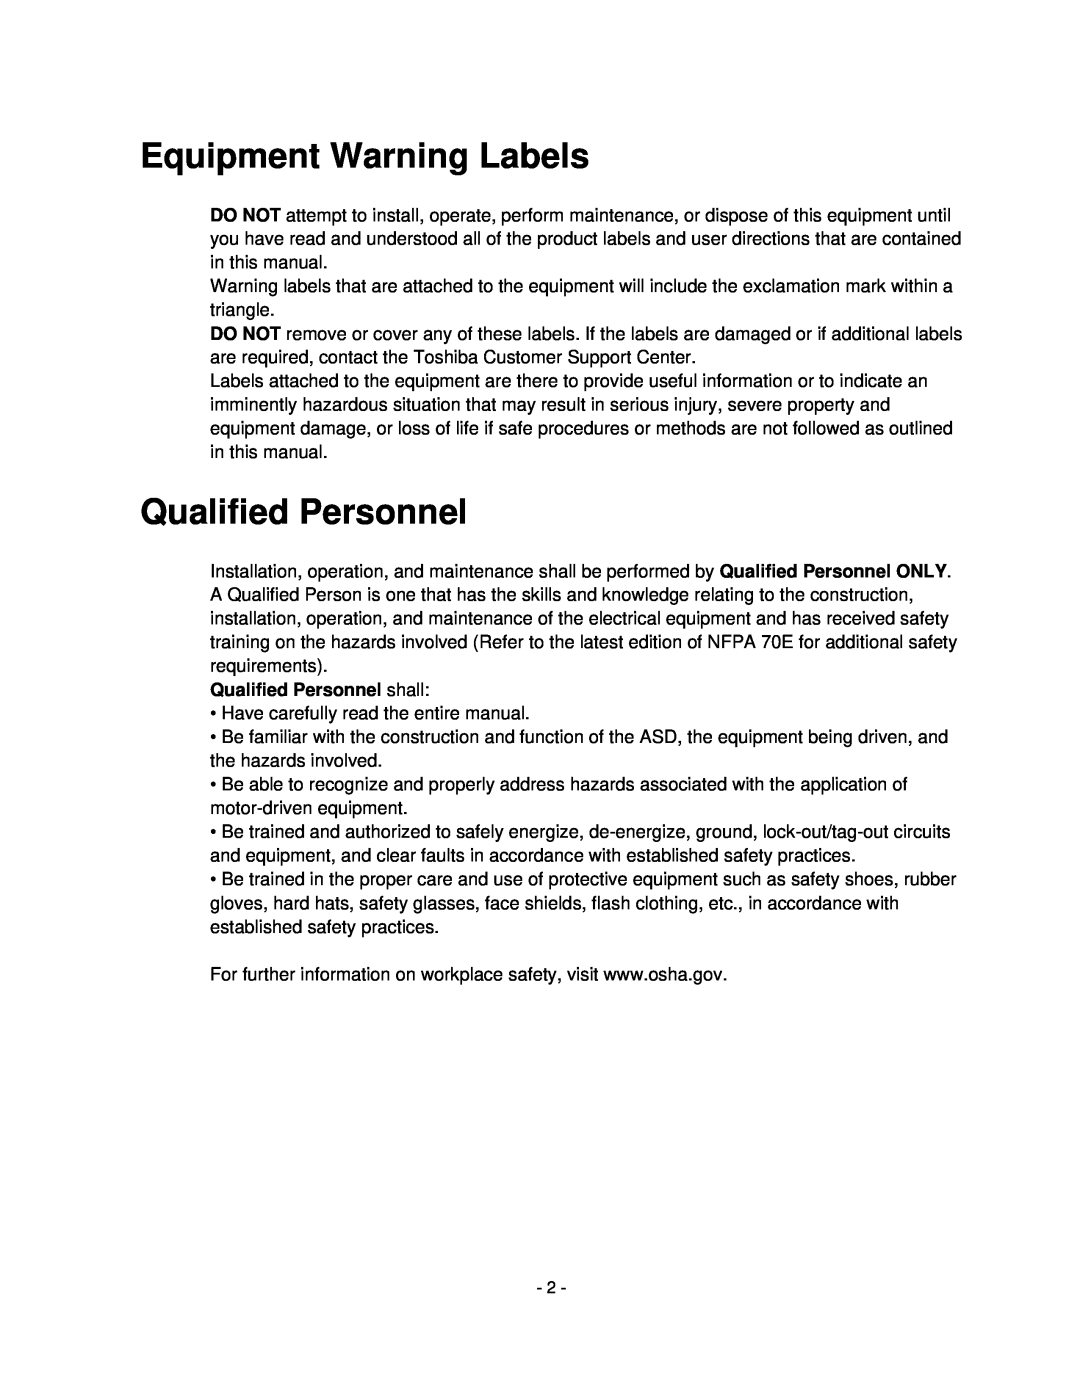 Toshiba HV6CS-MLD, H6A-HLS operation manual Equipment Warning Labels, Qualified Personnel shall 